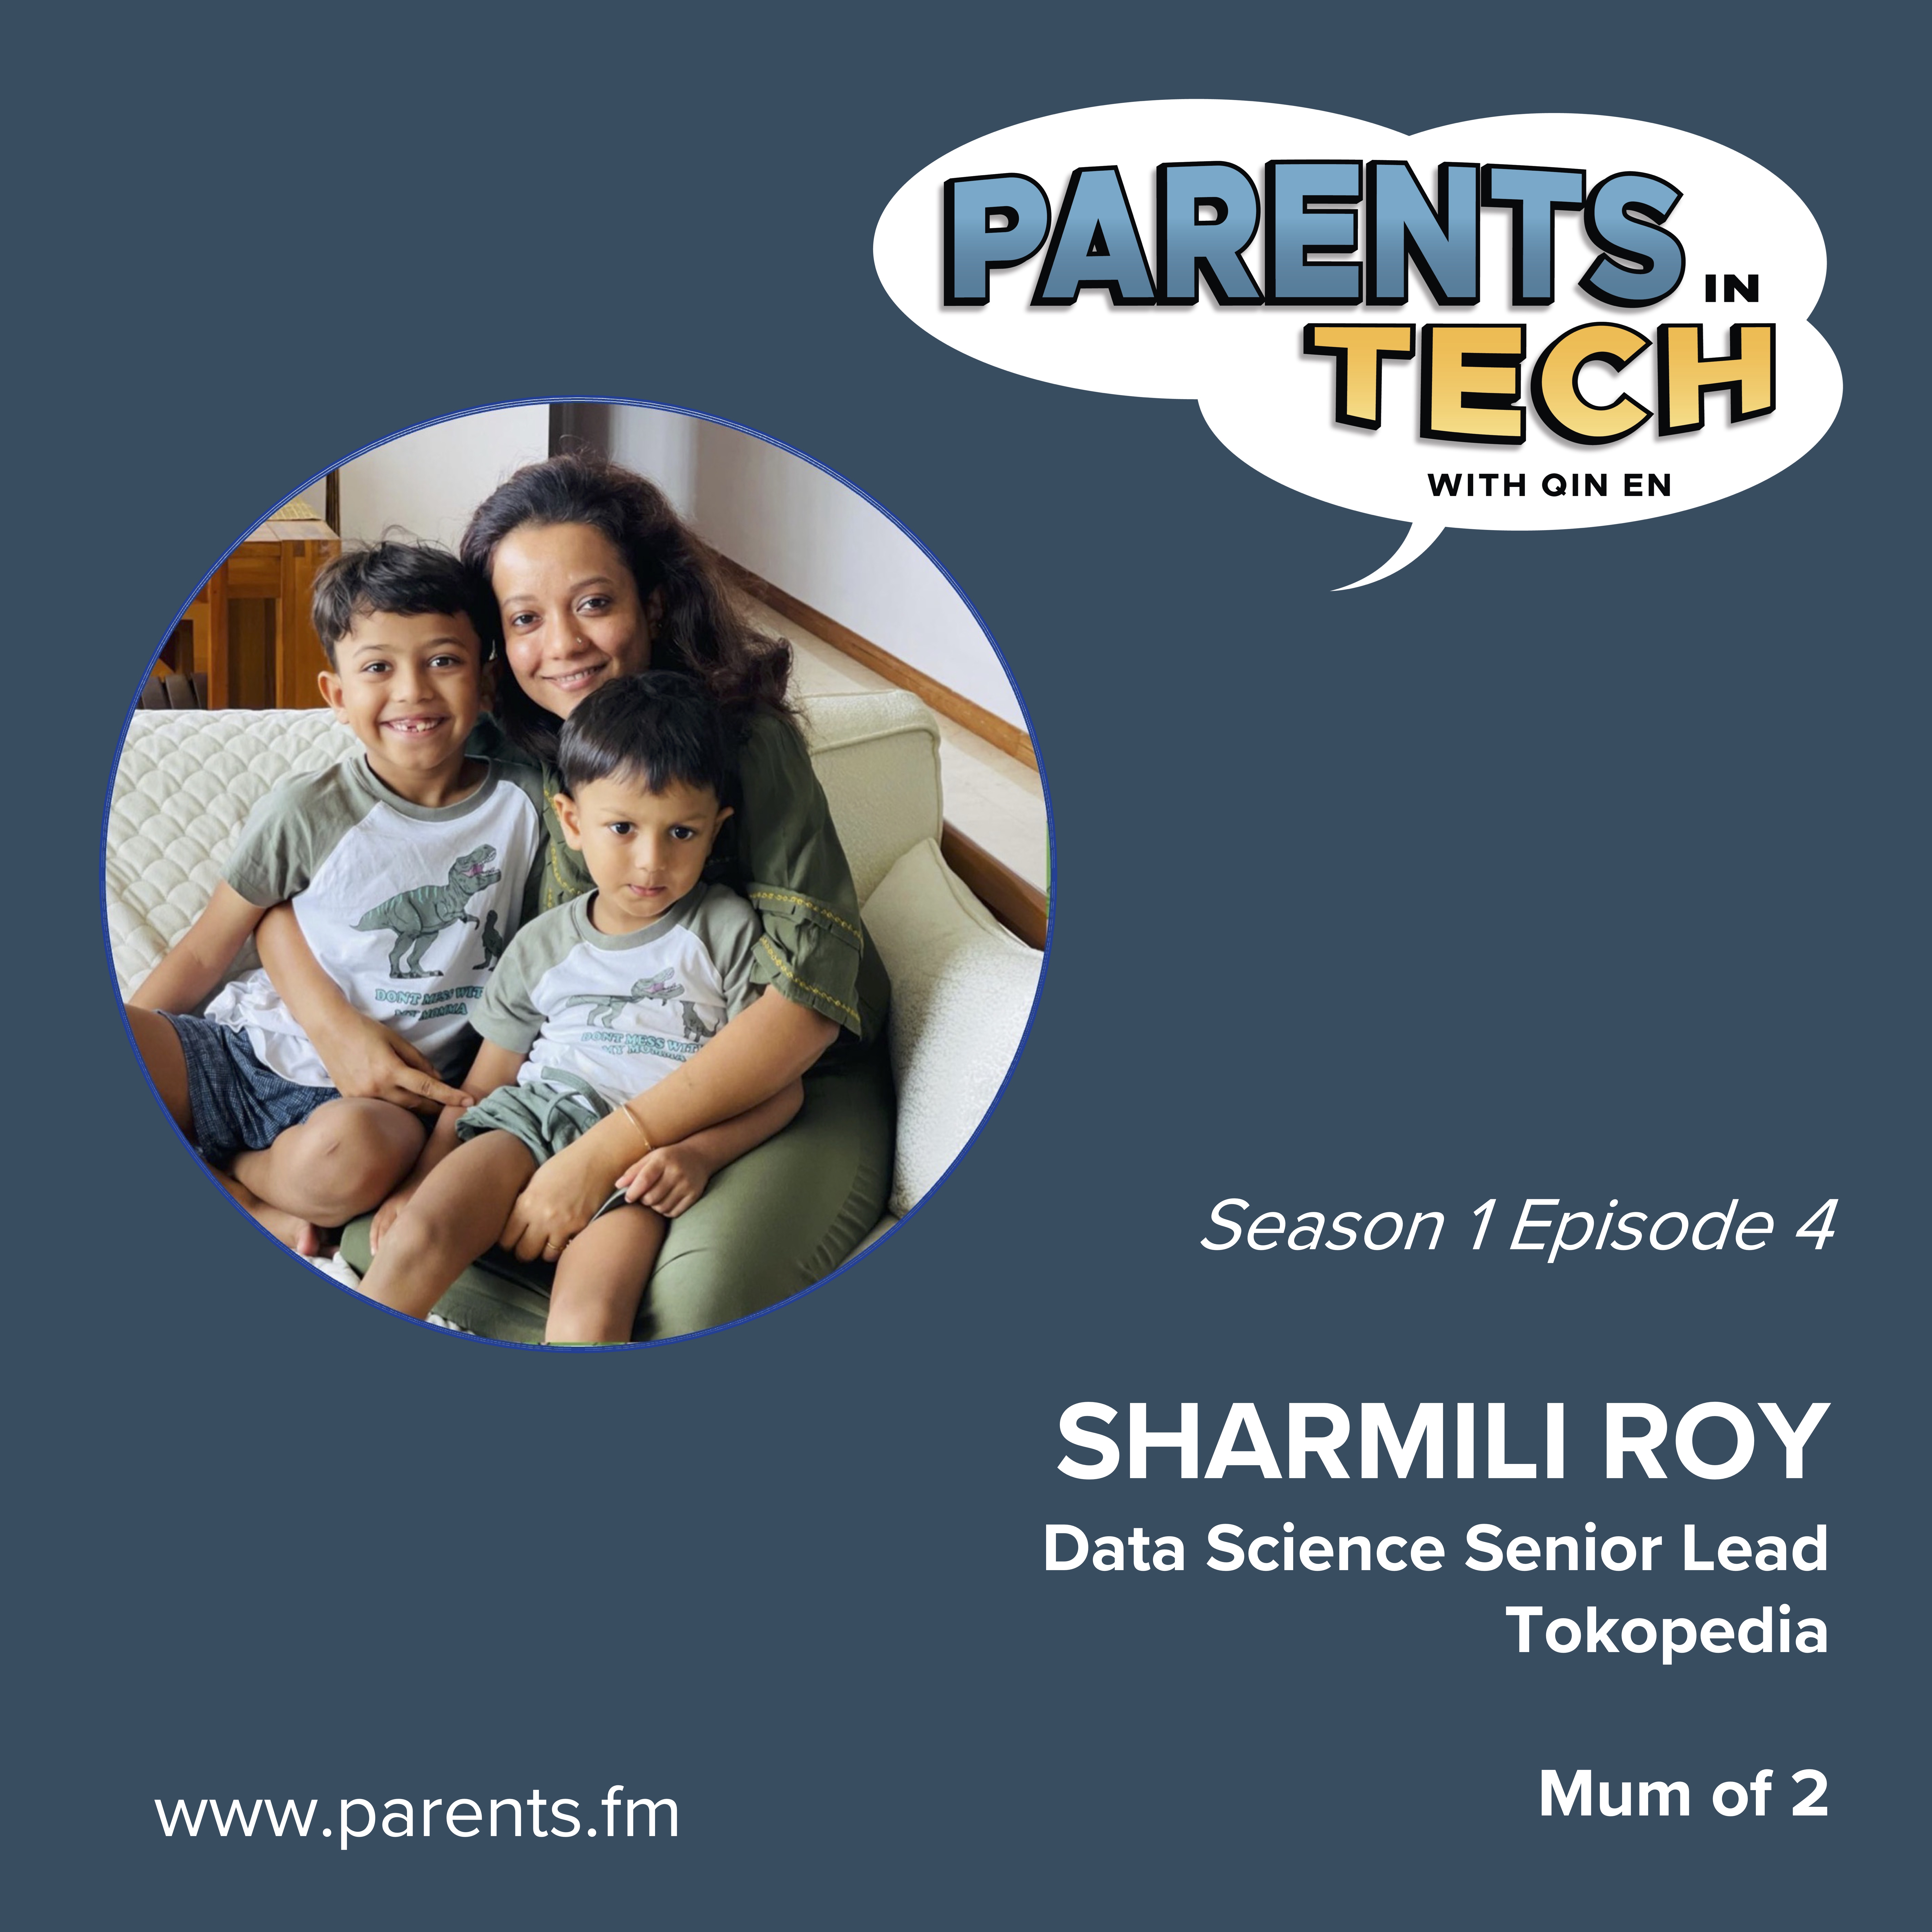 Debugging, Breadth vs Depth and Learning to be Bored, with Sharmili Roy